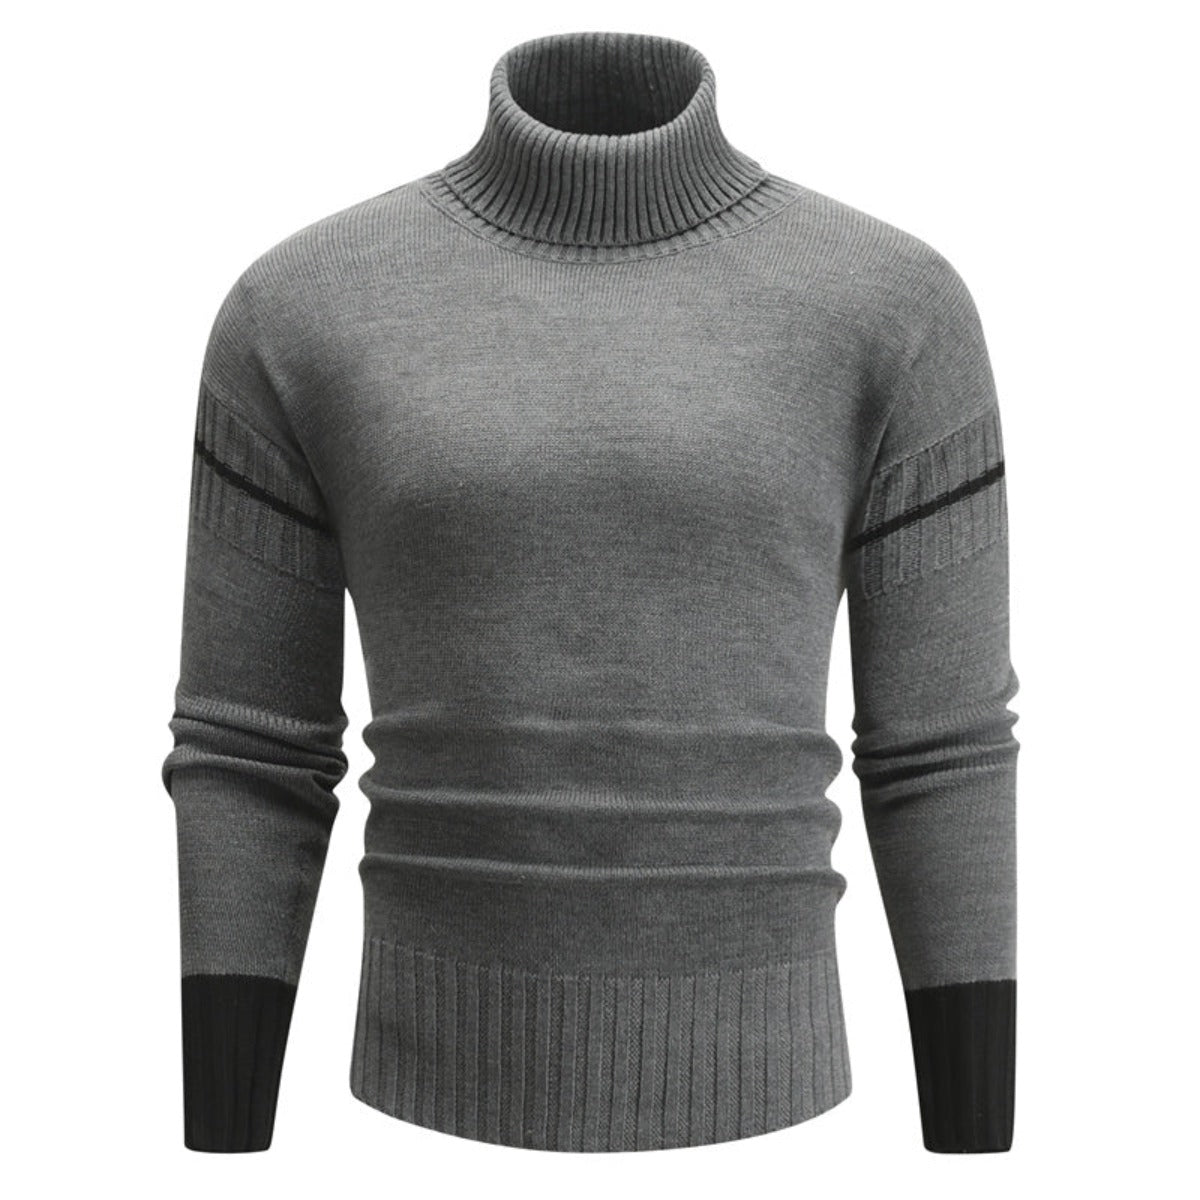 Cozy Comfort, Elevated Style: Cotton Turtleneck Sweater for Effortless Warmth 100% Cotton LA ROSE BEAUTY